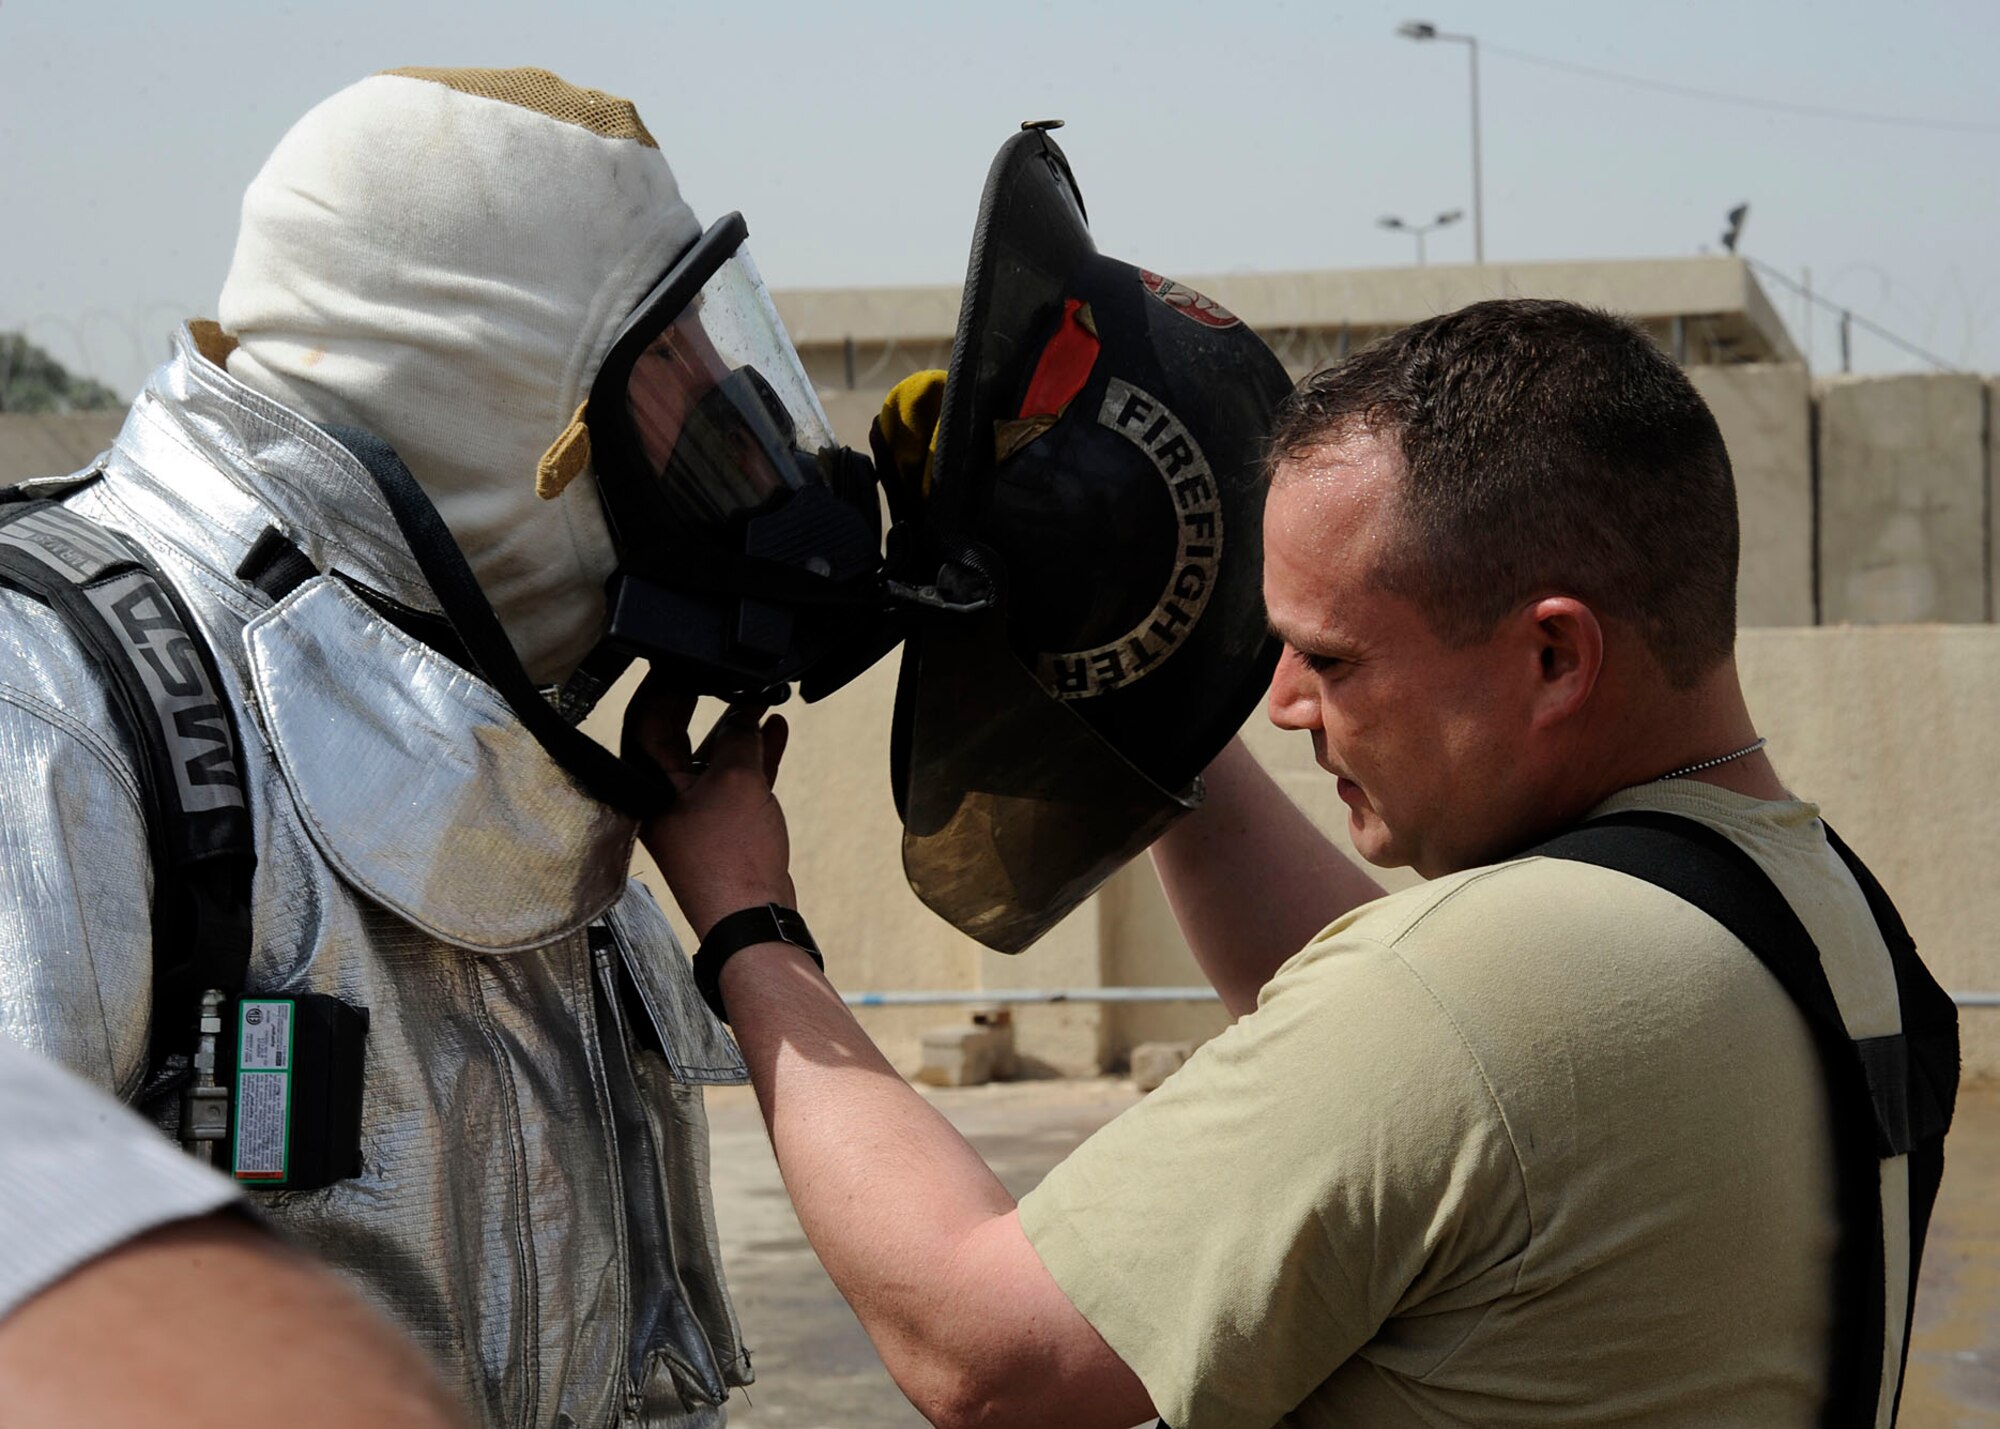 Tech. Sgt. Brian Partido, 821st Basic Technical Training Squadron, Coalition Air Force Transition Team fire rescue advisor, helps fellow instructor and advisor, Tech. Sgt. Jay Wingfield, with his helmet before a live fire exercise in Baghdad, Iraq April 13, 2009.  Sergeants Partido and Wingfield train students of the Iraqi Joint Fire Academy in the practical portion of the course.  The two-month course is made up of 26 students from the Iraqi air force and Iraqi civil defense.  Sergeant Partido is deployed from the 19th Civil Engineer Squadron in Little Rock Air Force Base, Ark., and is a native of El Paso, Texas.  Sergeant Wingfield is deployed from Goodfellow AFB, Texas and is a native of Peoria, Ill.  (U.S. Air Force photo by Senior Airman Jacqueline Romero)